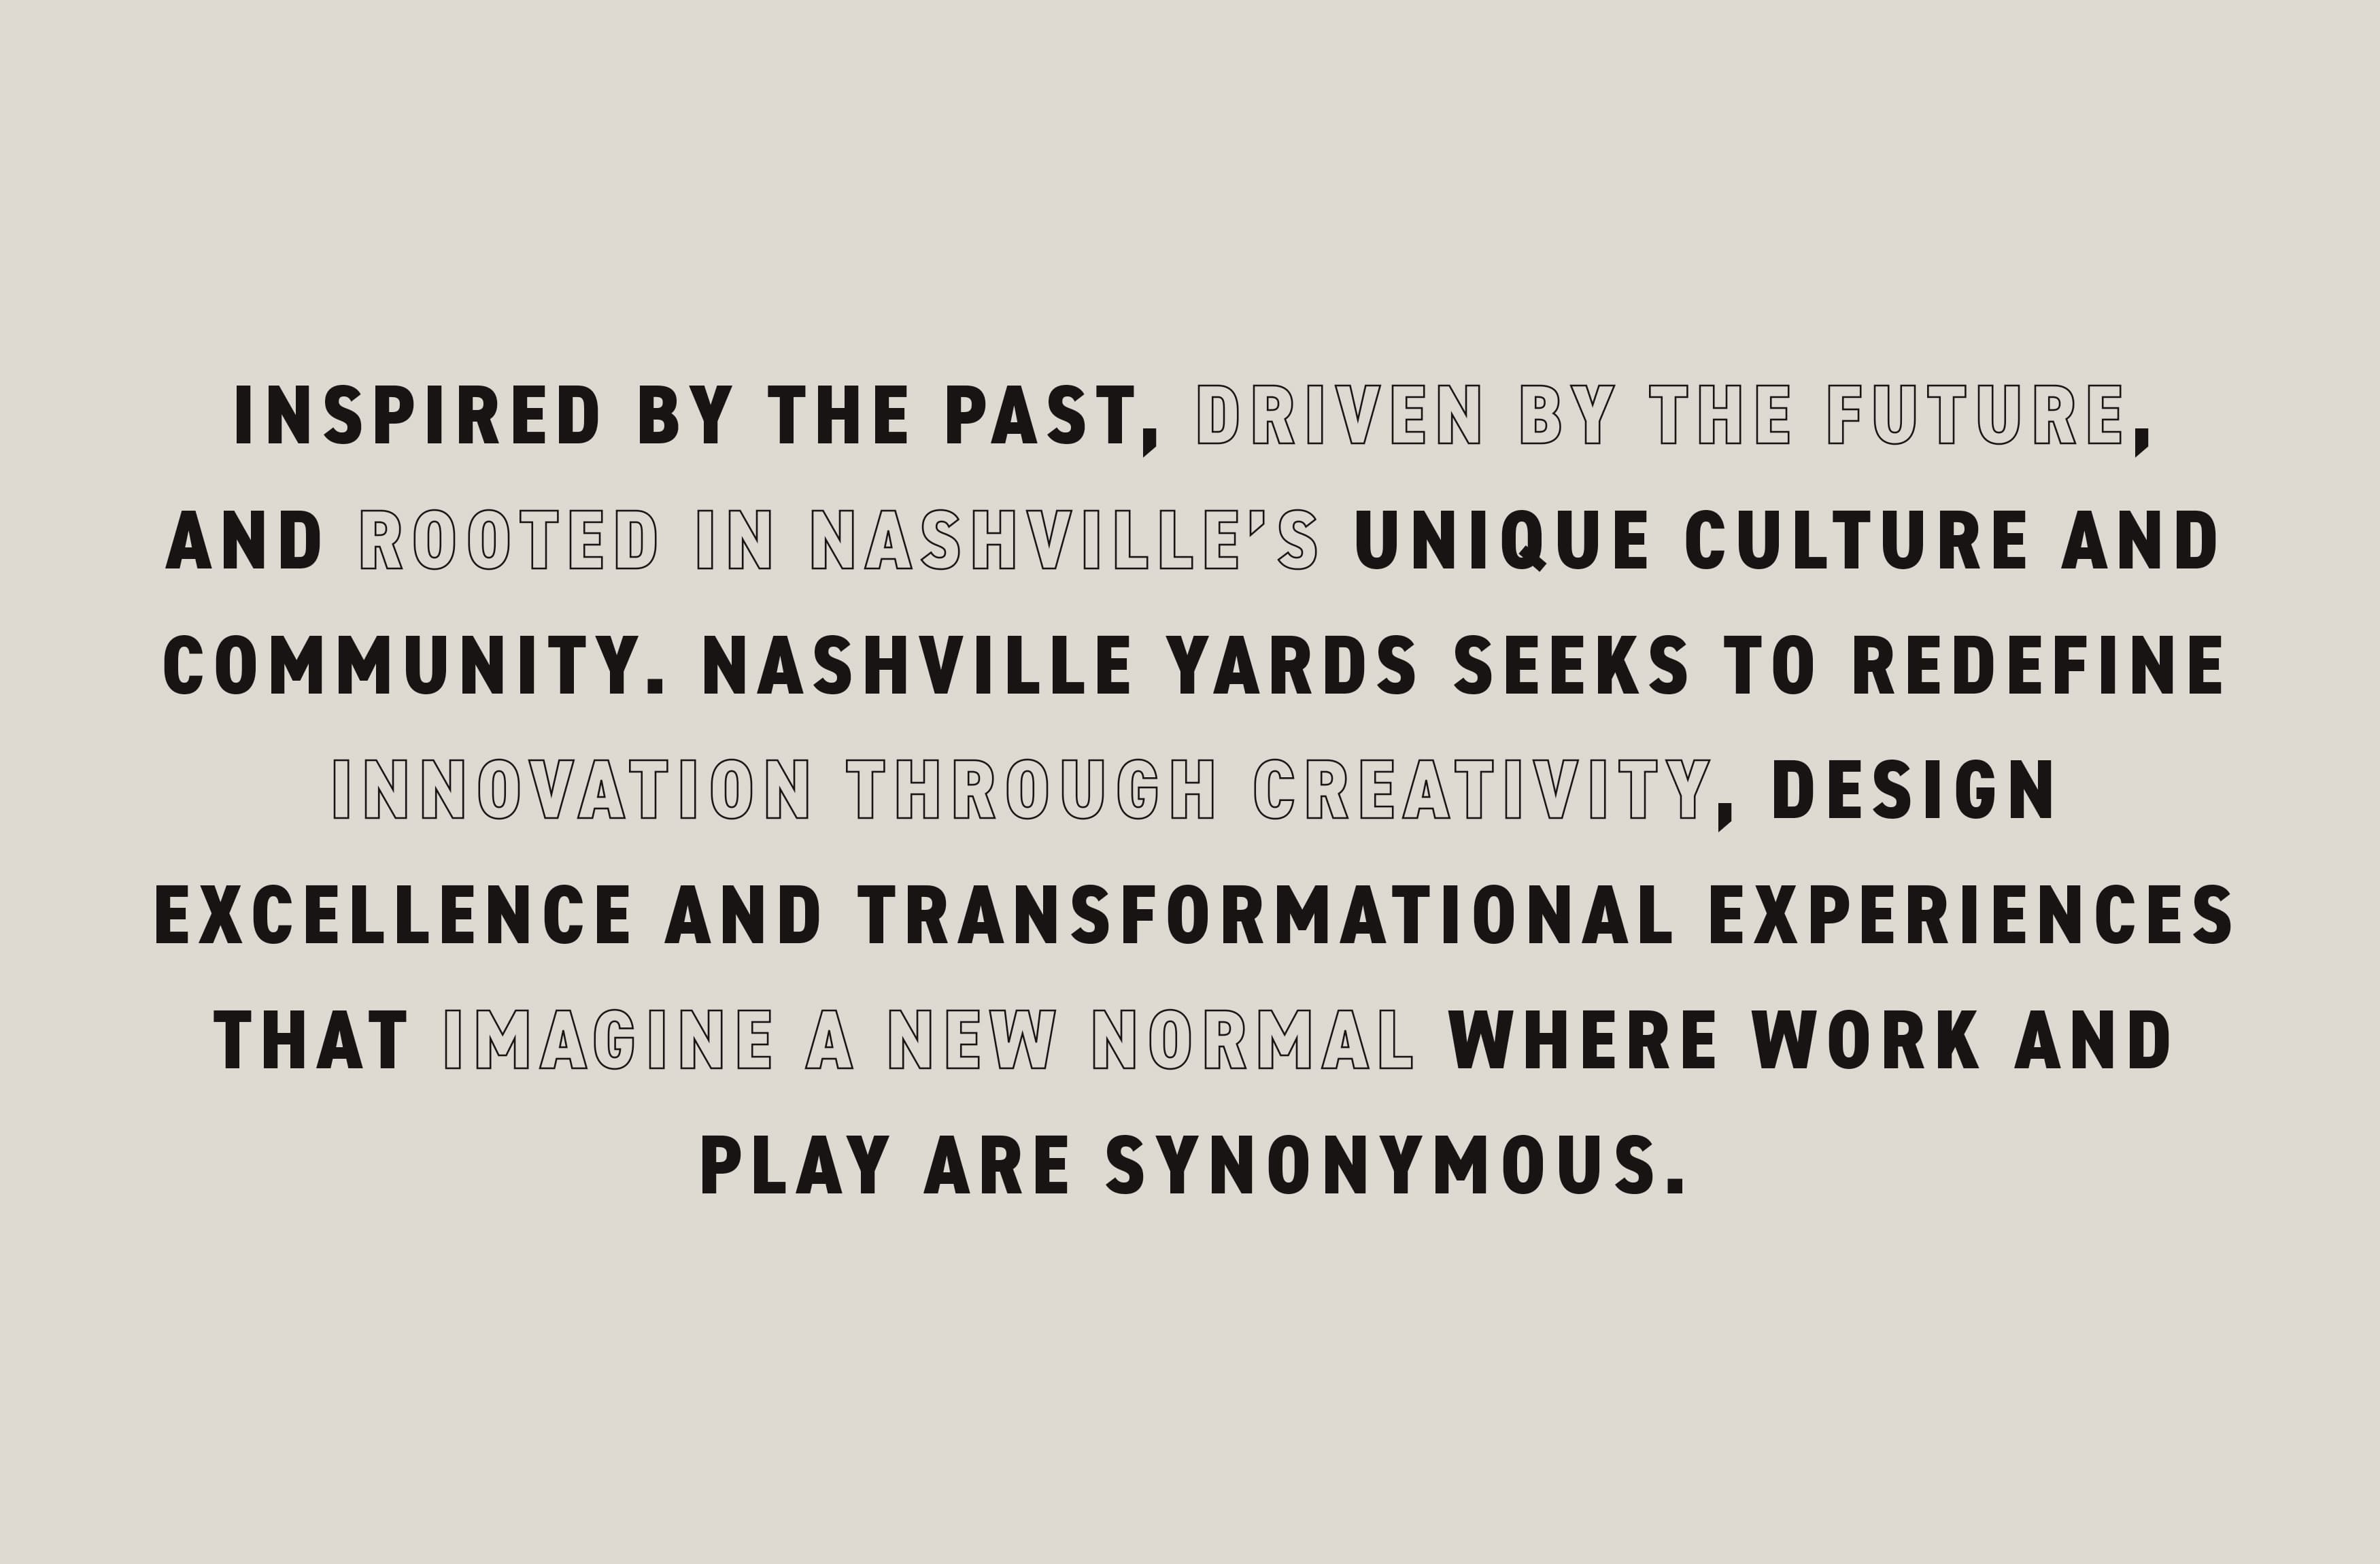 INSPIRED BY THE PAST, DRIVEN BY THE FUTURE, AND ROOTED IN NASHVILLE’S UNIQUE CULTURE AND COMMUNITY. NASHVILLE YARDS SEEKS TO REDEFINE INNOVATION THROUGH CREATIVITY, DESIGN EXCELLENCE AND TRANSFORMATIONAL EXPERIENCES THAT IMAGINE A NEW NORMAL WHERE WORK AND PLAY ARE synonymous.